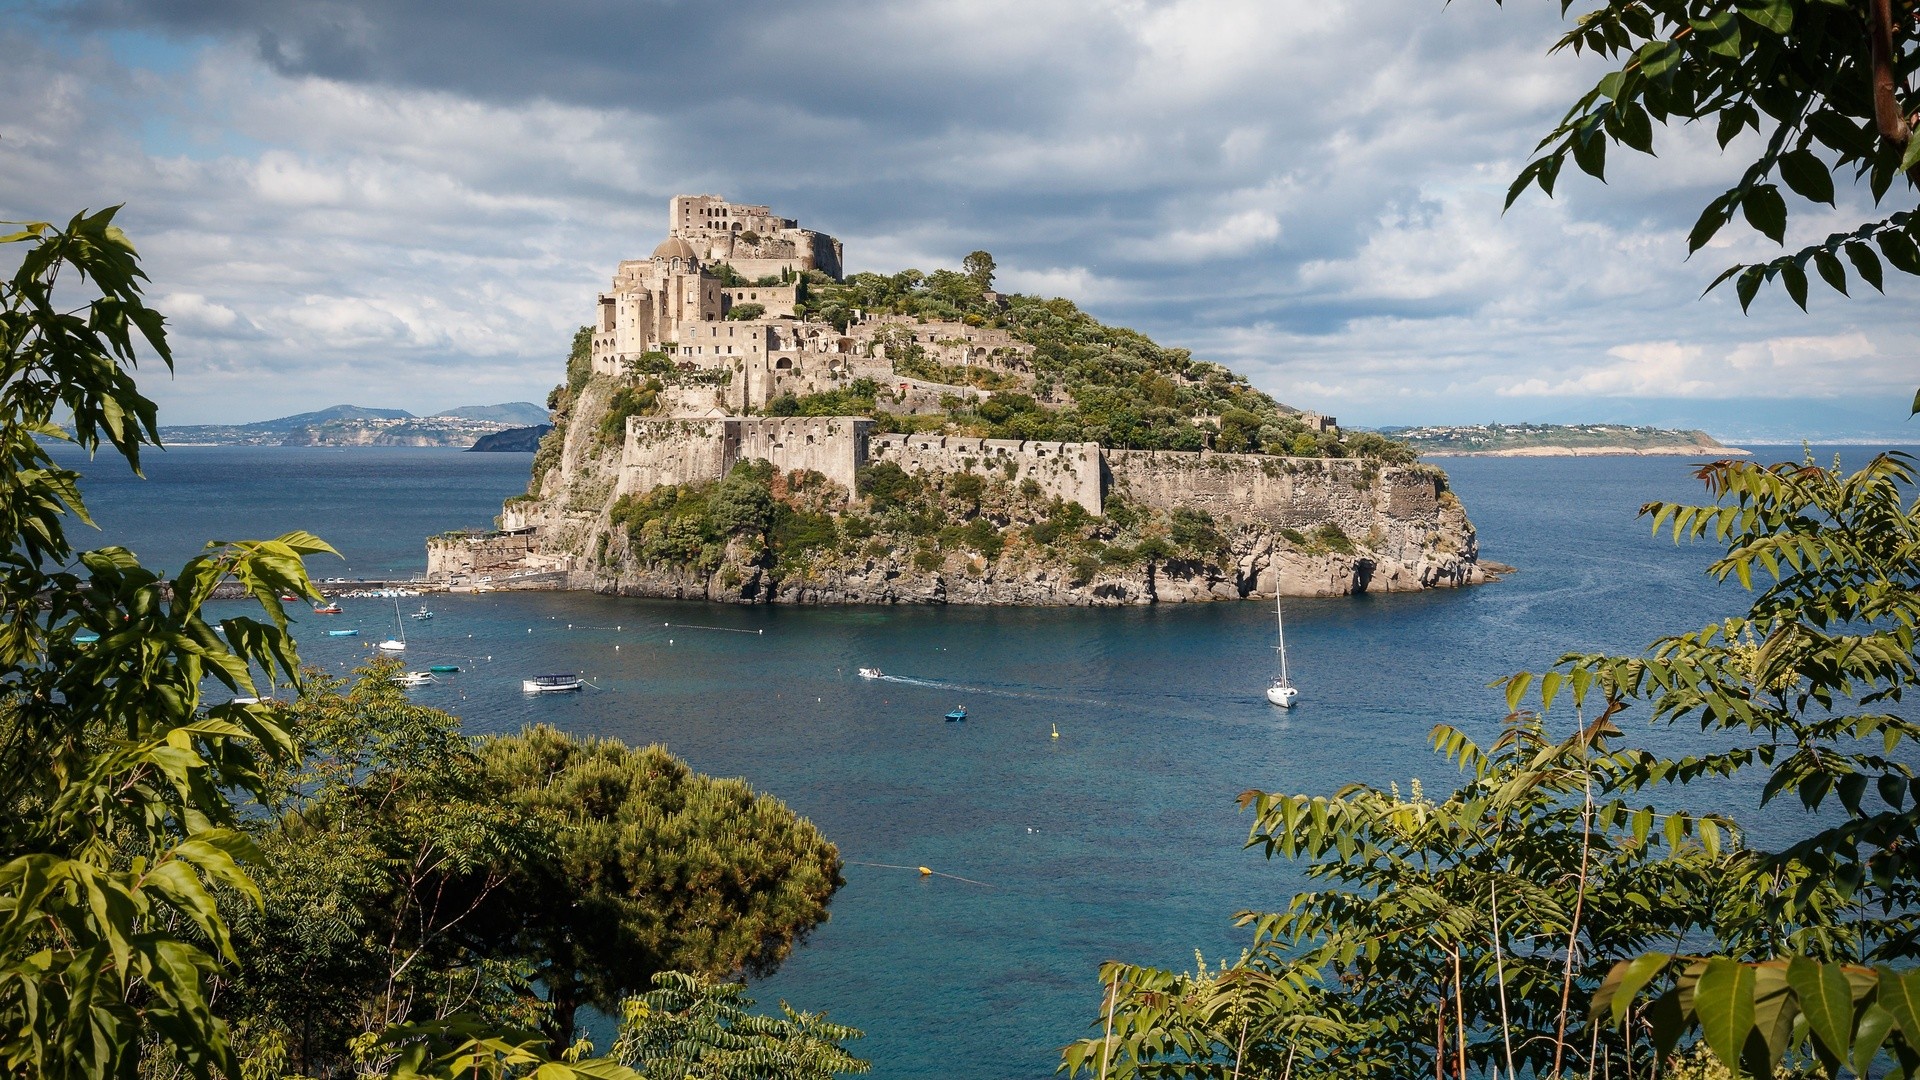 General 1920x1080 nature architecture landscape old building hills trees house Italy monastery island clouds sea boat yacht Santa Maria Dell'isola